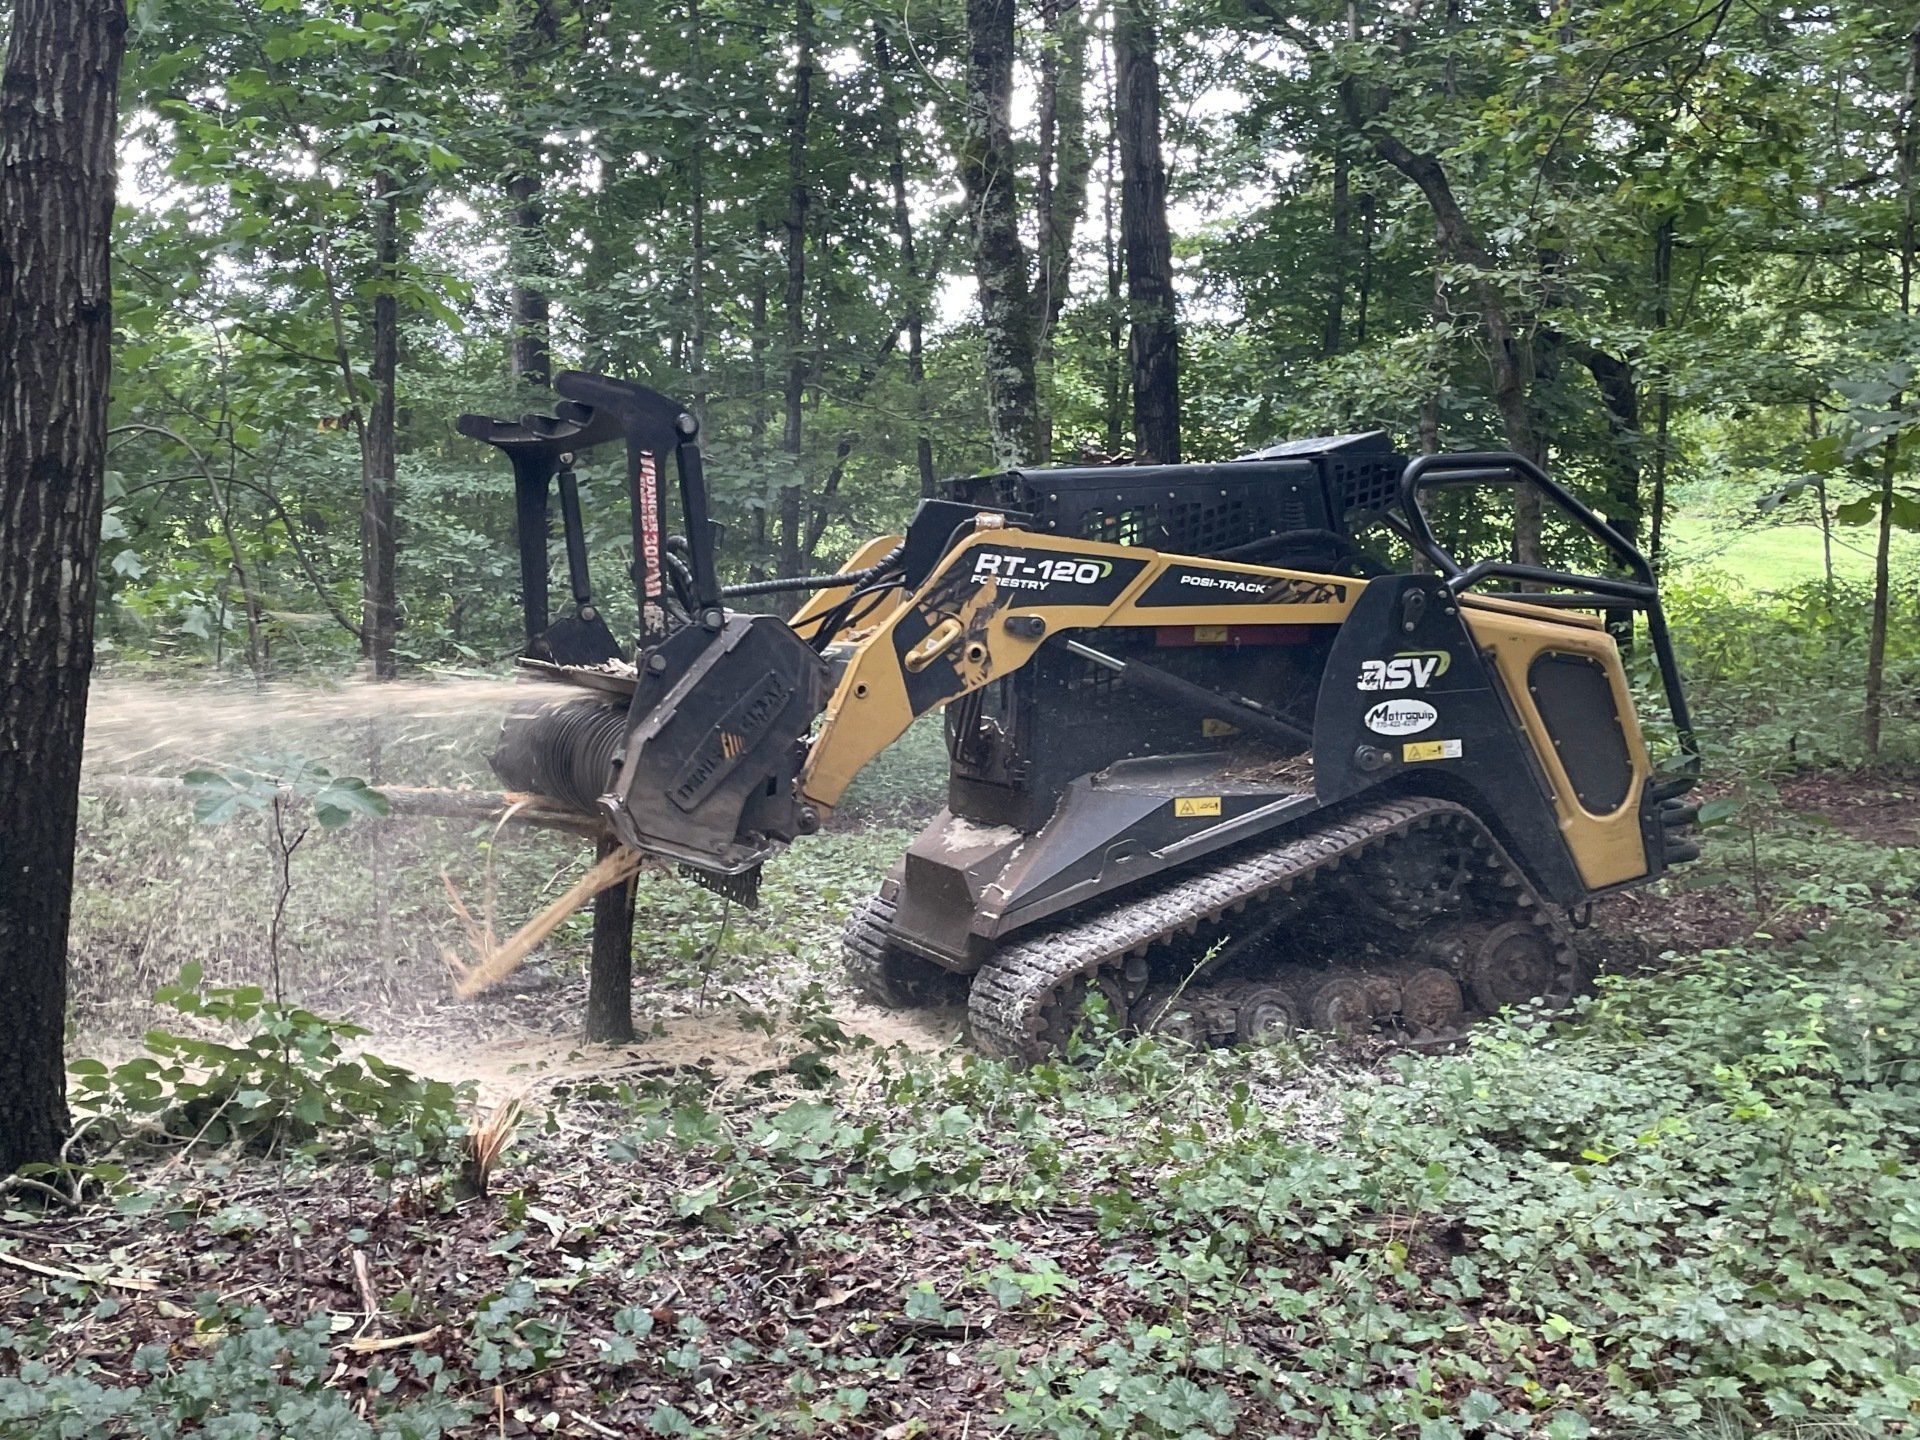 Heritage Forestry Mulching Service in North GA